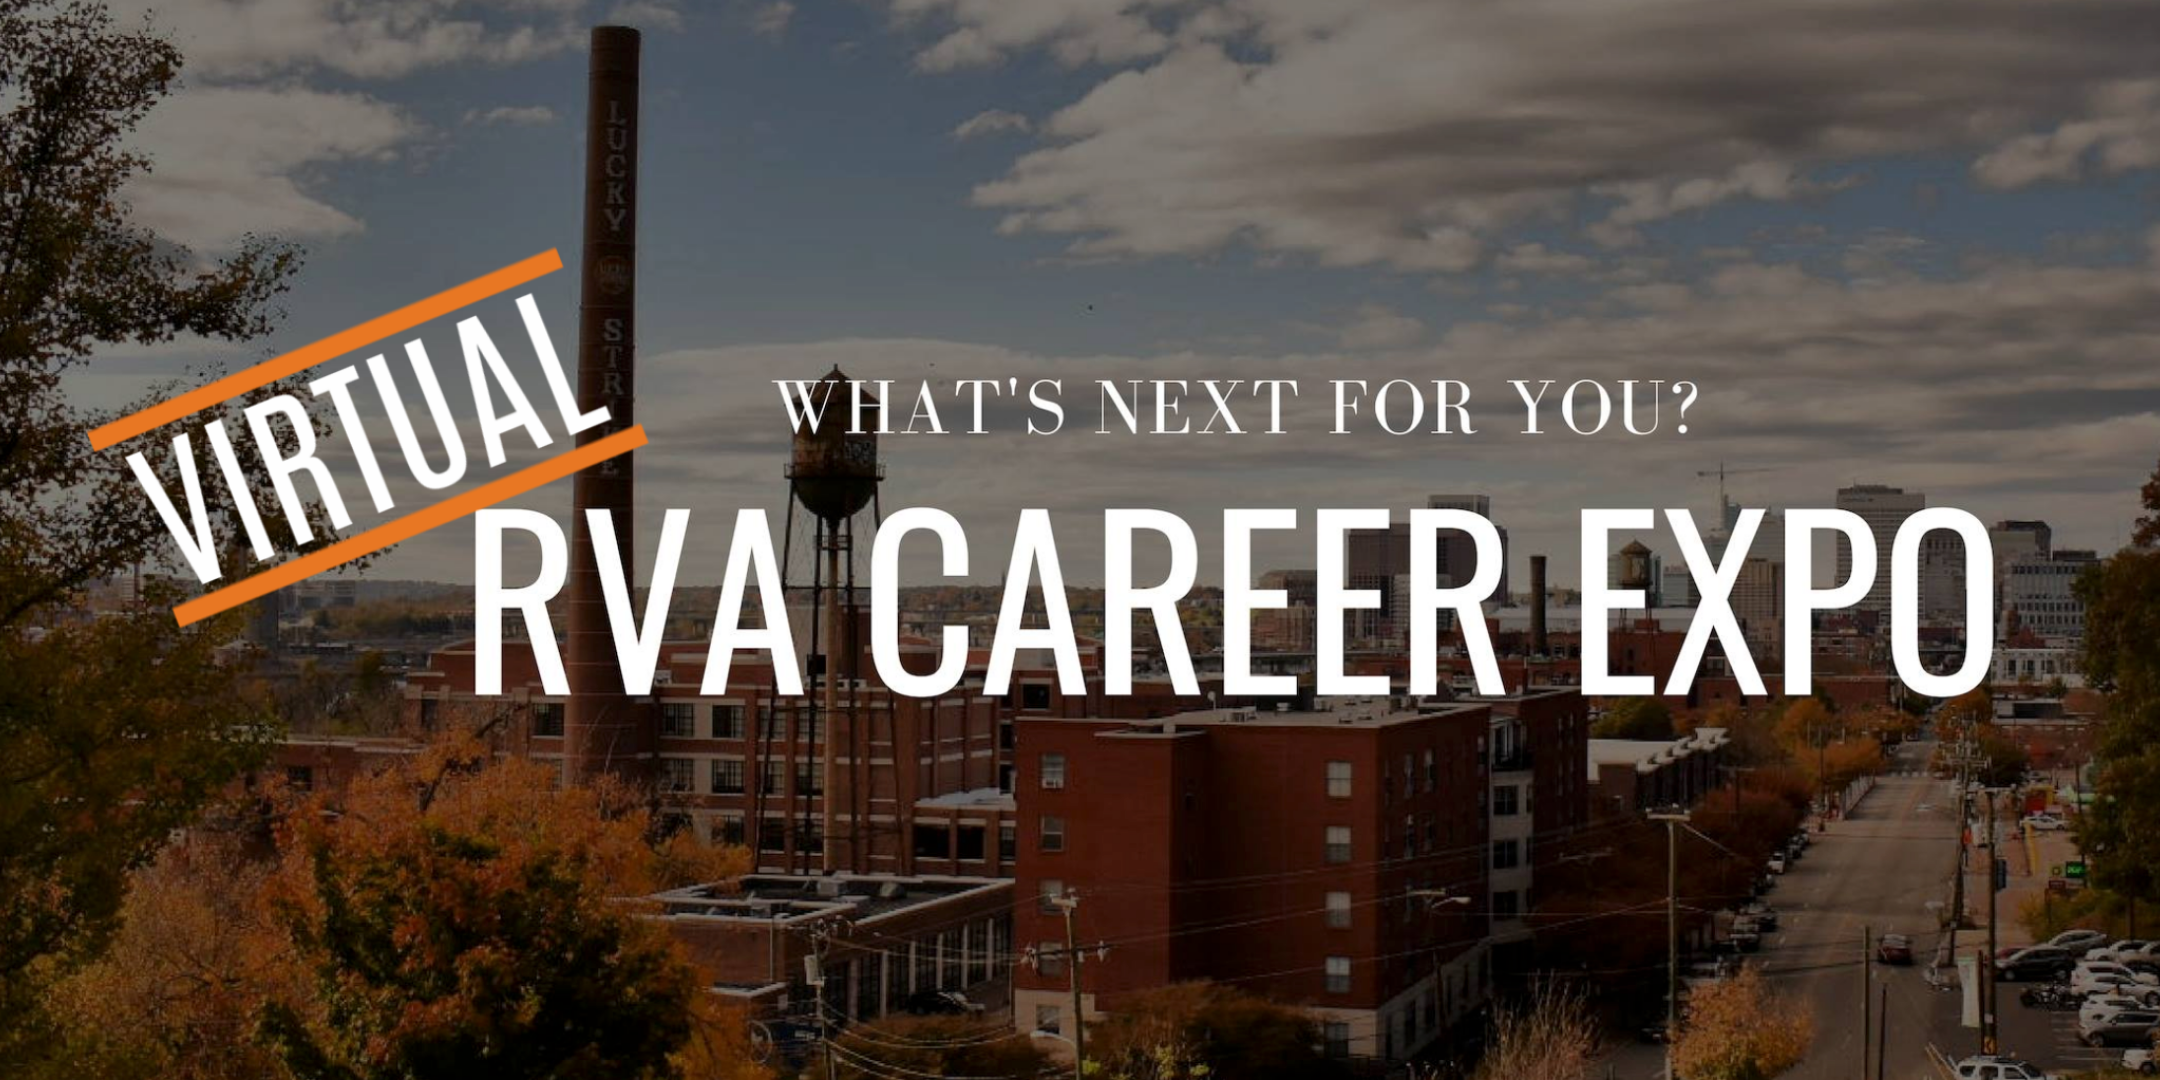 The RVA Career Expo is Going Virtual This October!